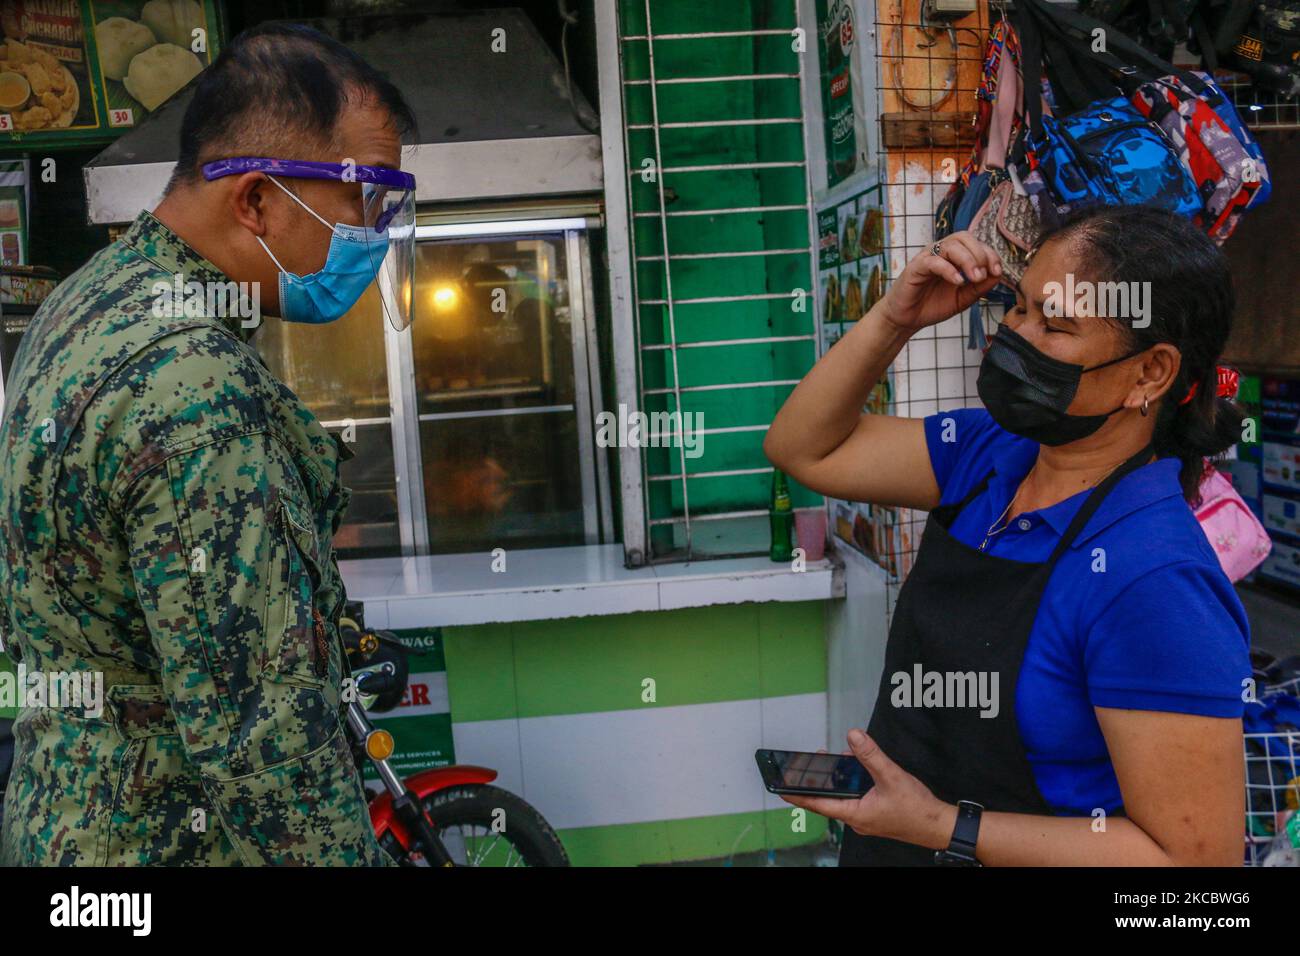 Police officer are reminding people in public to properly wear their face mask and face shield in Antipolo City on March 31, 2021. Due to surge of COVID-19 cases in Philippines, stricter community quarantine are reimposed in Greater Manila Area since March 29 to April 4, 2021 to curb the spread of coronavirus in Philippines. Authorities are already tired on reminding people to simply wear their protective gears against virus. As of March 31, the Department of Health reported 6,128 new COVID-19 cases with total of 747,288 cases and deaths of 13,297. (Photo by Ryan Eduard Benaid/NurPhoto) Stock Photo